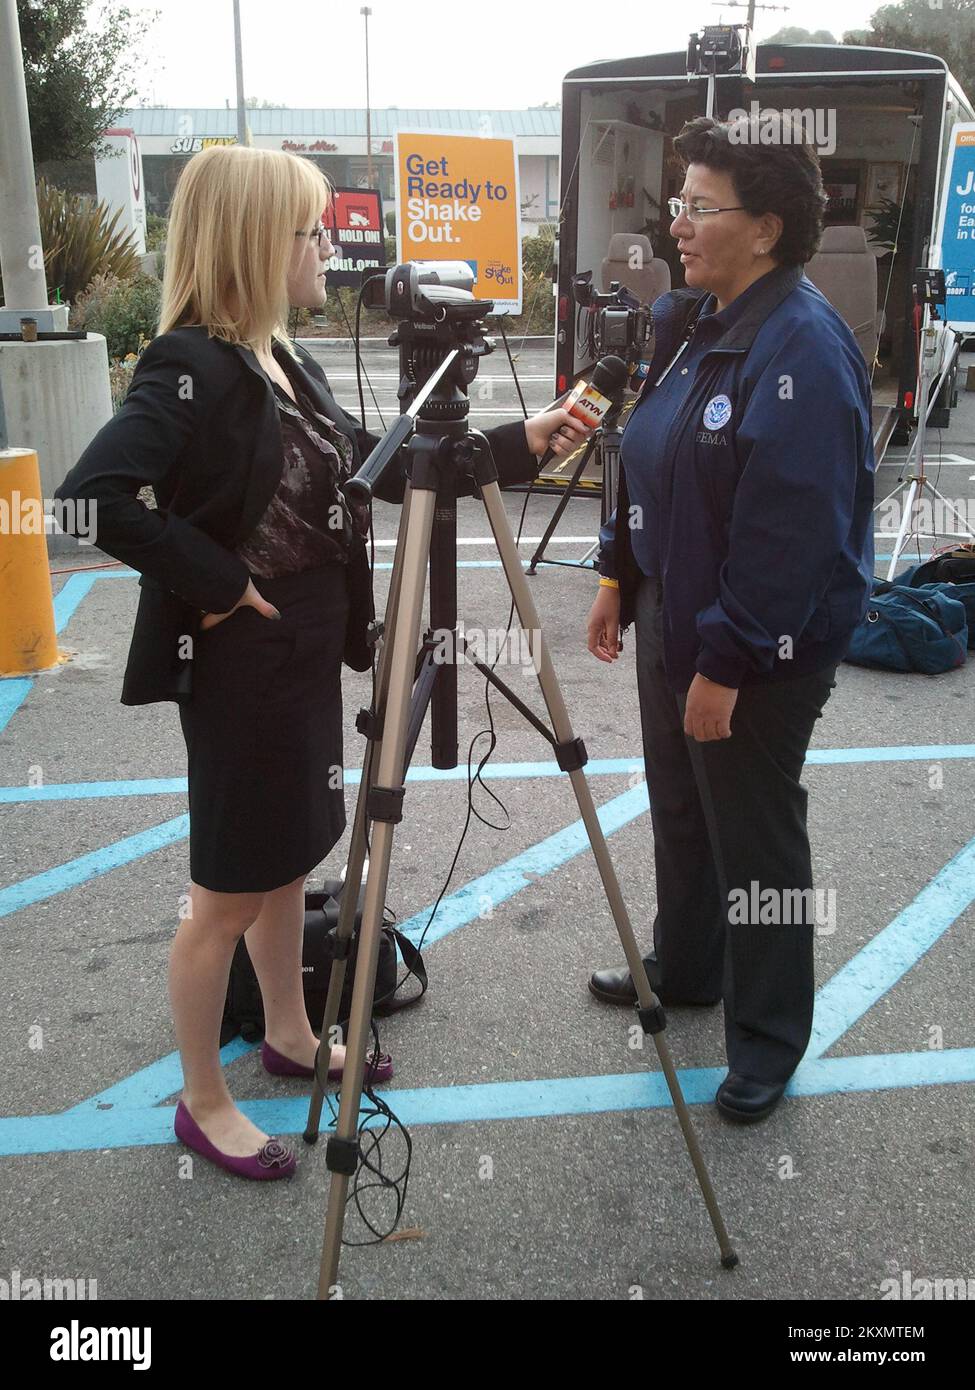 Earthquake   Emergency Planning and Security - Northridge, Calif. , October 20, 2011   Veronica Verde, FEMA Region IX External Affairs Officer, provided information to the media at a press event in a Southern California Target store to promote the California Great Shakeout. CalEMA, USGS and Los Angeles Mayor Antonio Villaraigosa were among those in attendance.. Photographs Relating to Disasters and Emergency Management Programs, Activities, and Officials Stock Photo